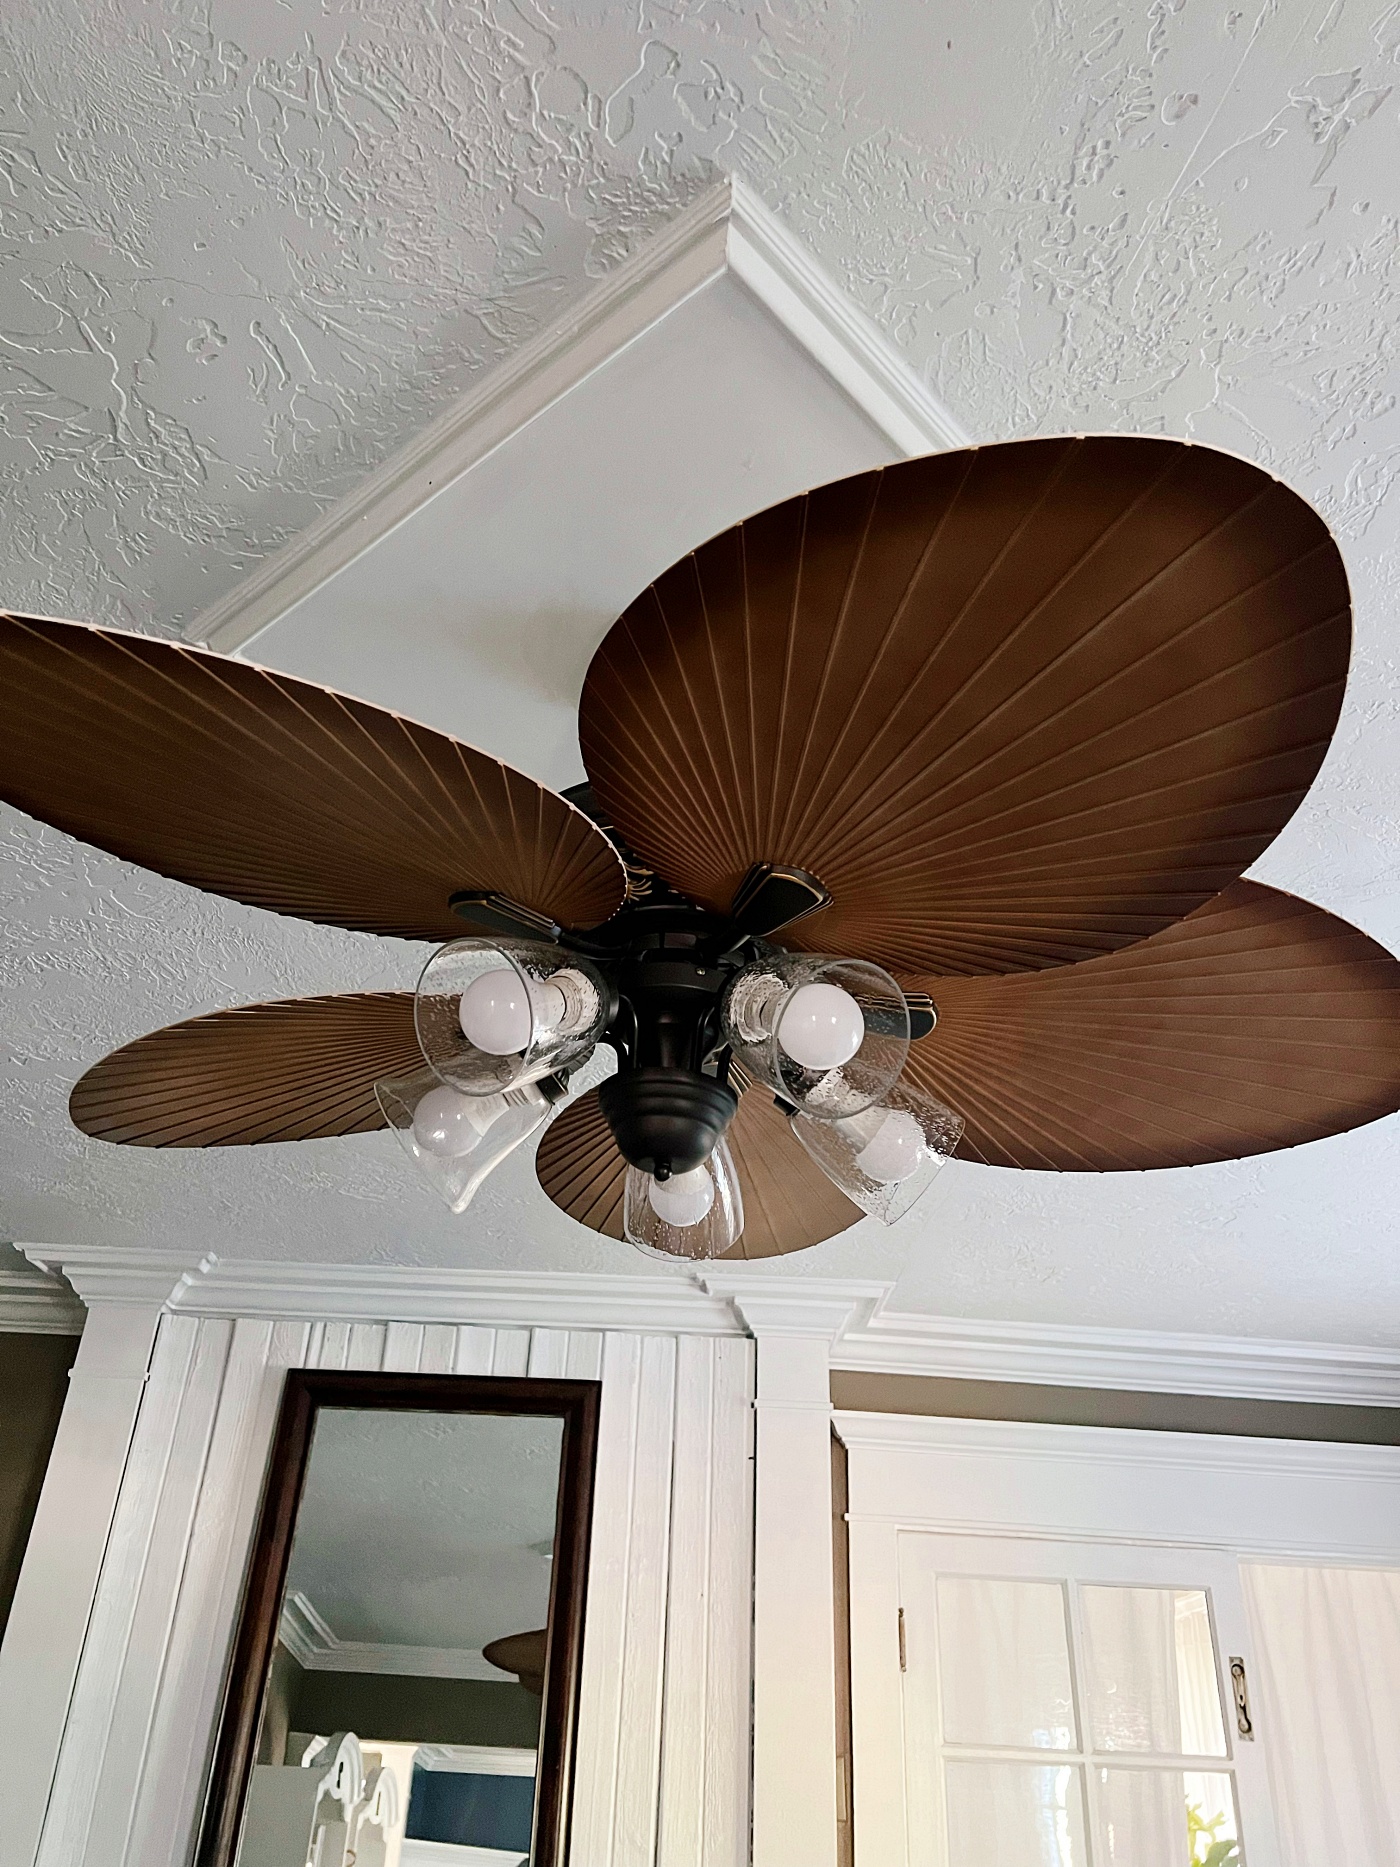 New Tropical Palm Ceiling Fan in our British Colonial Style Living Room